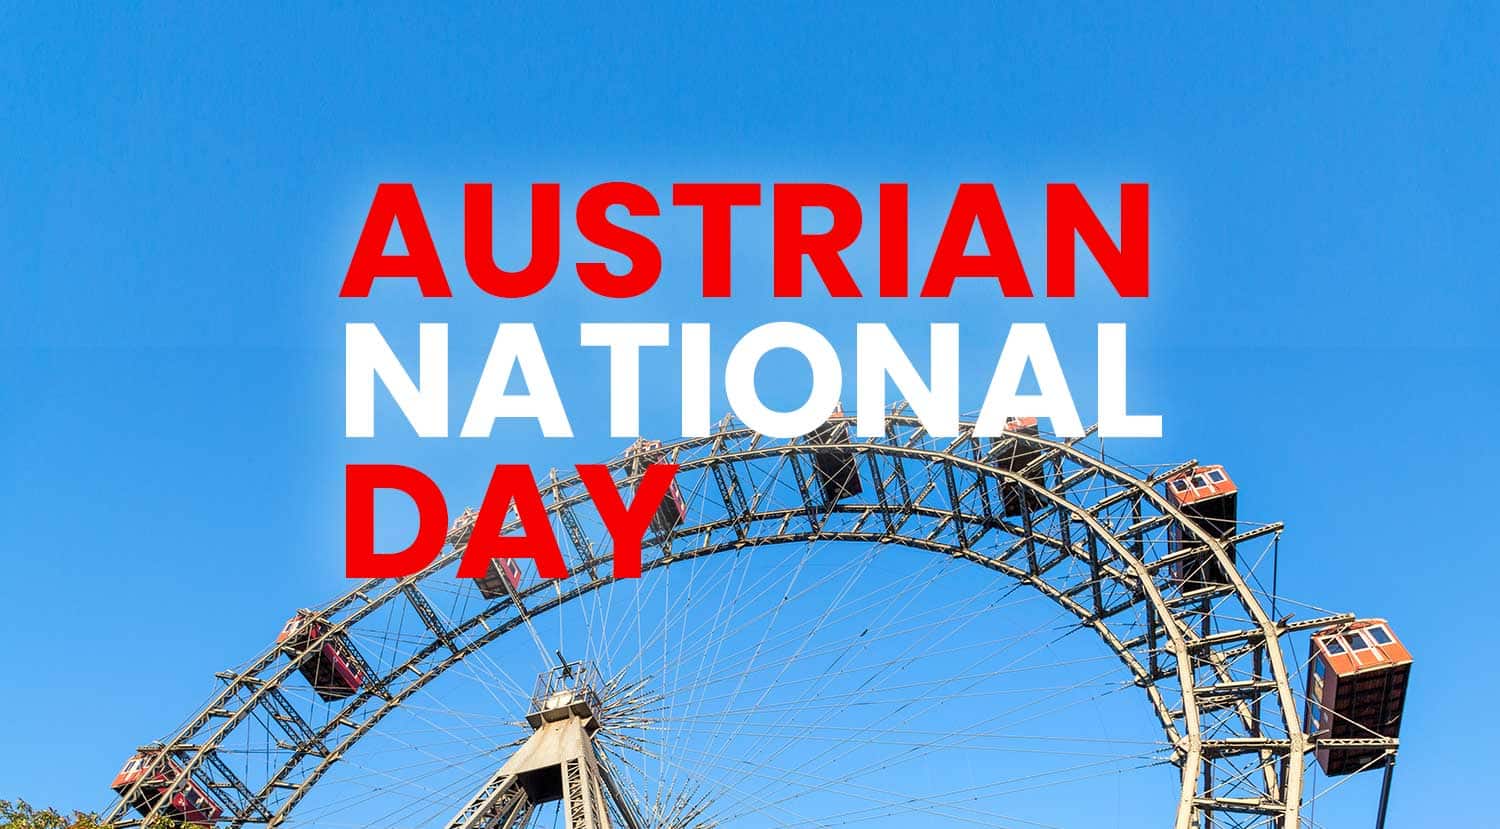 How panagendians Celebrate the Austrian National Day